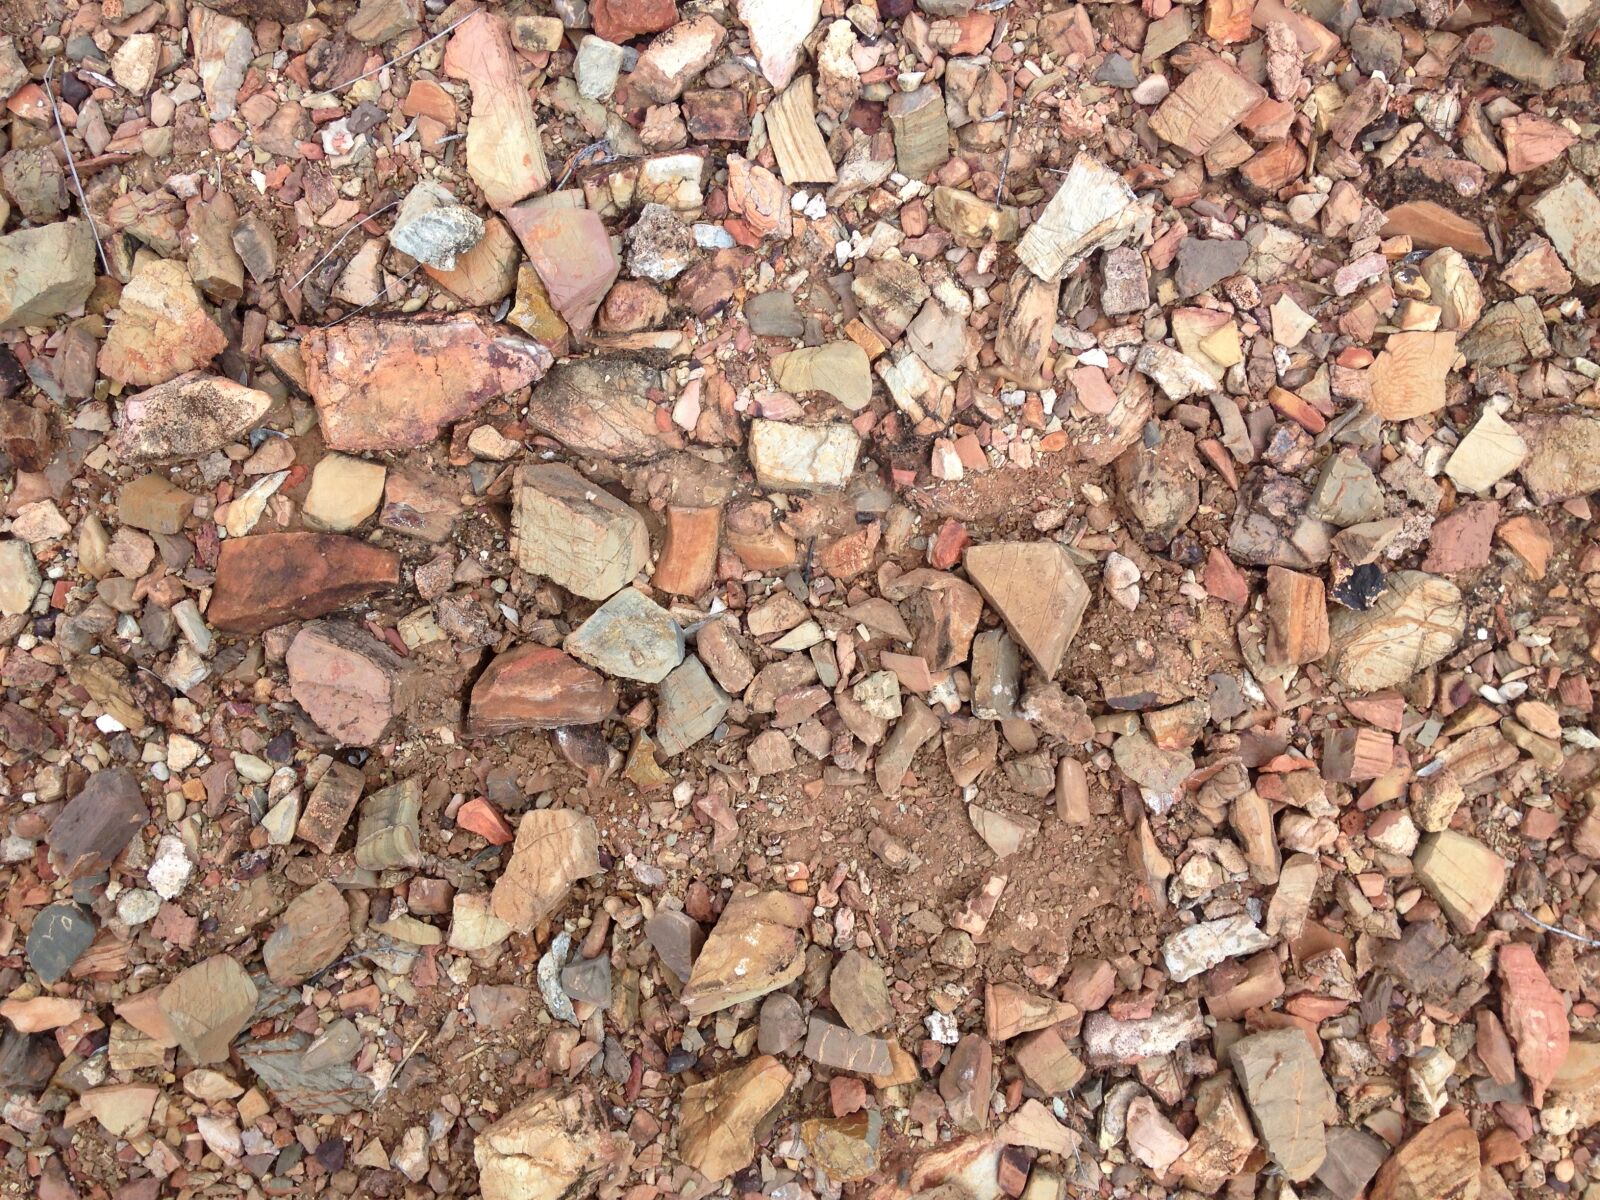 Apple iPhone 5c sample photo. Abstract, ground, rocks, stones photography